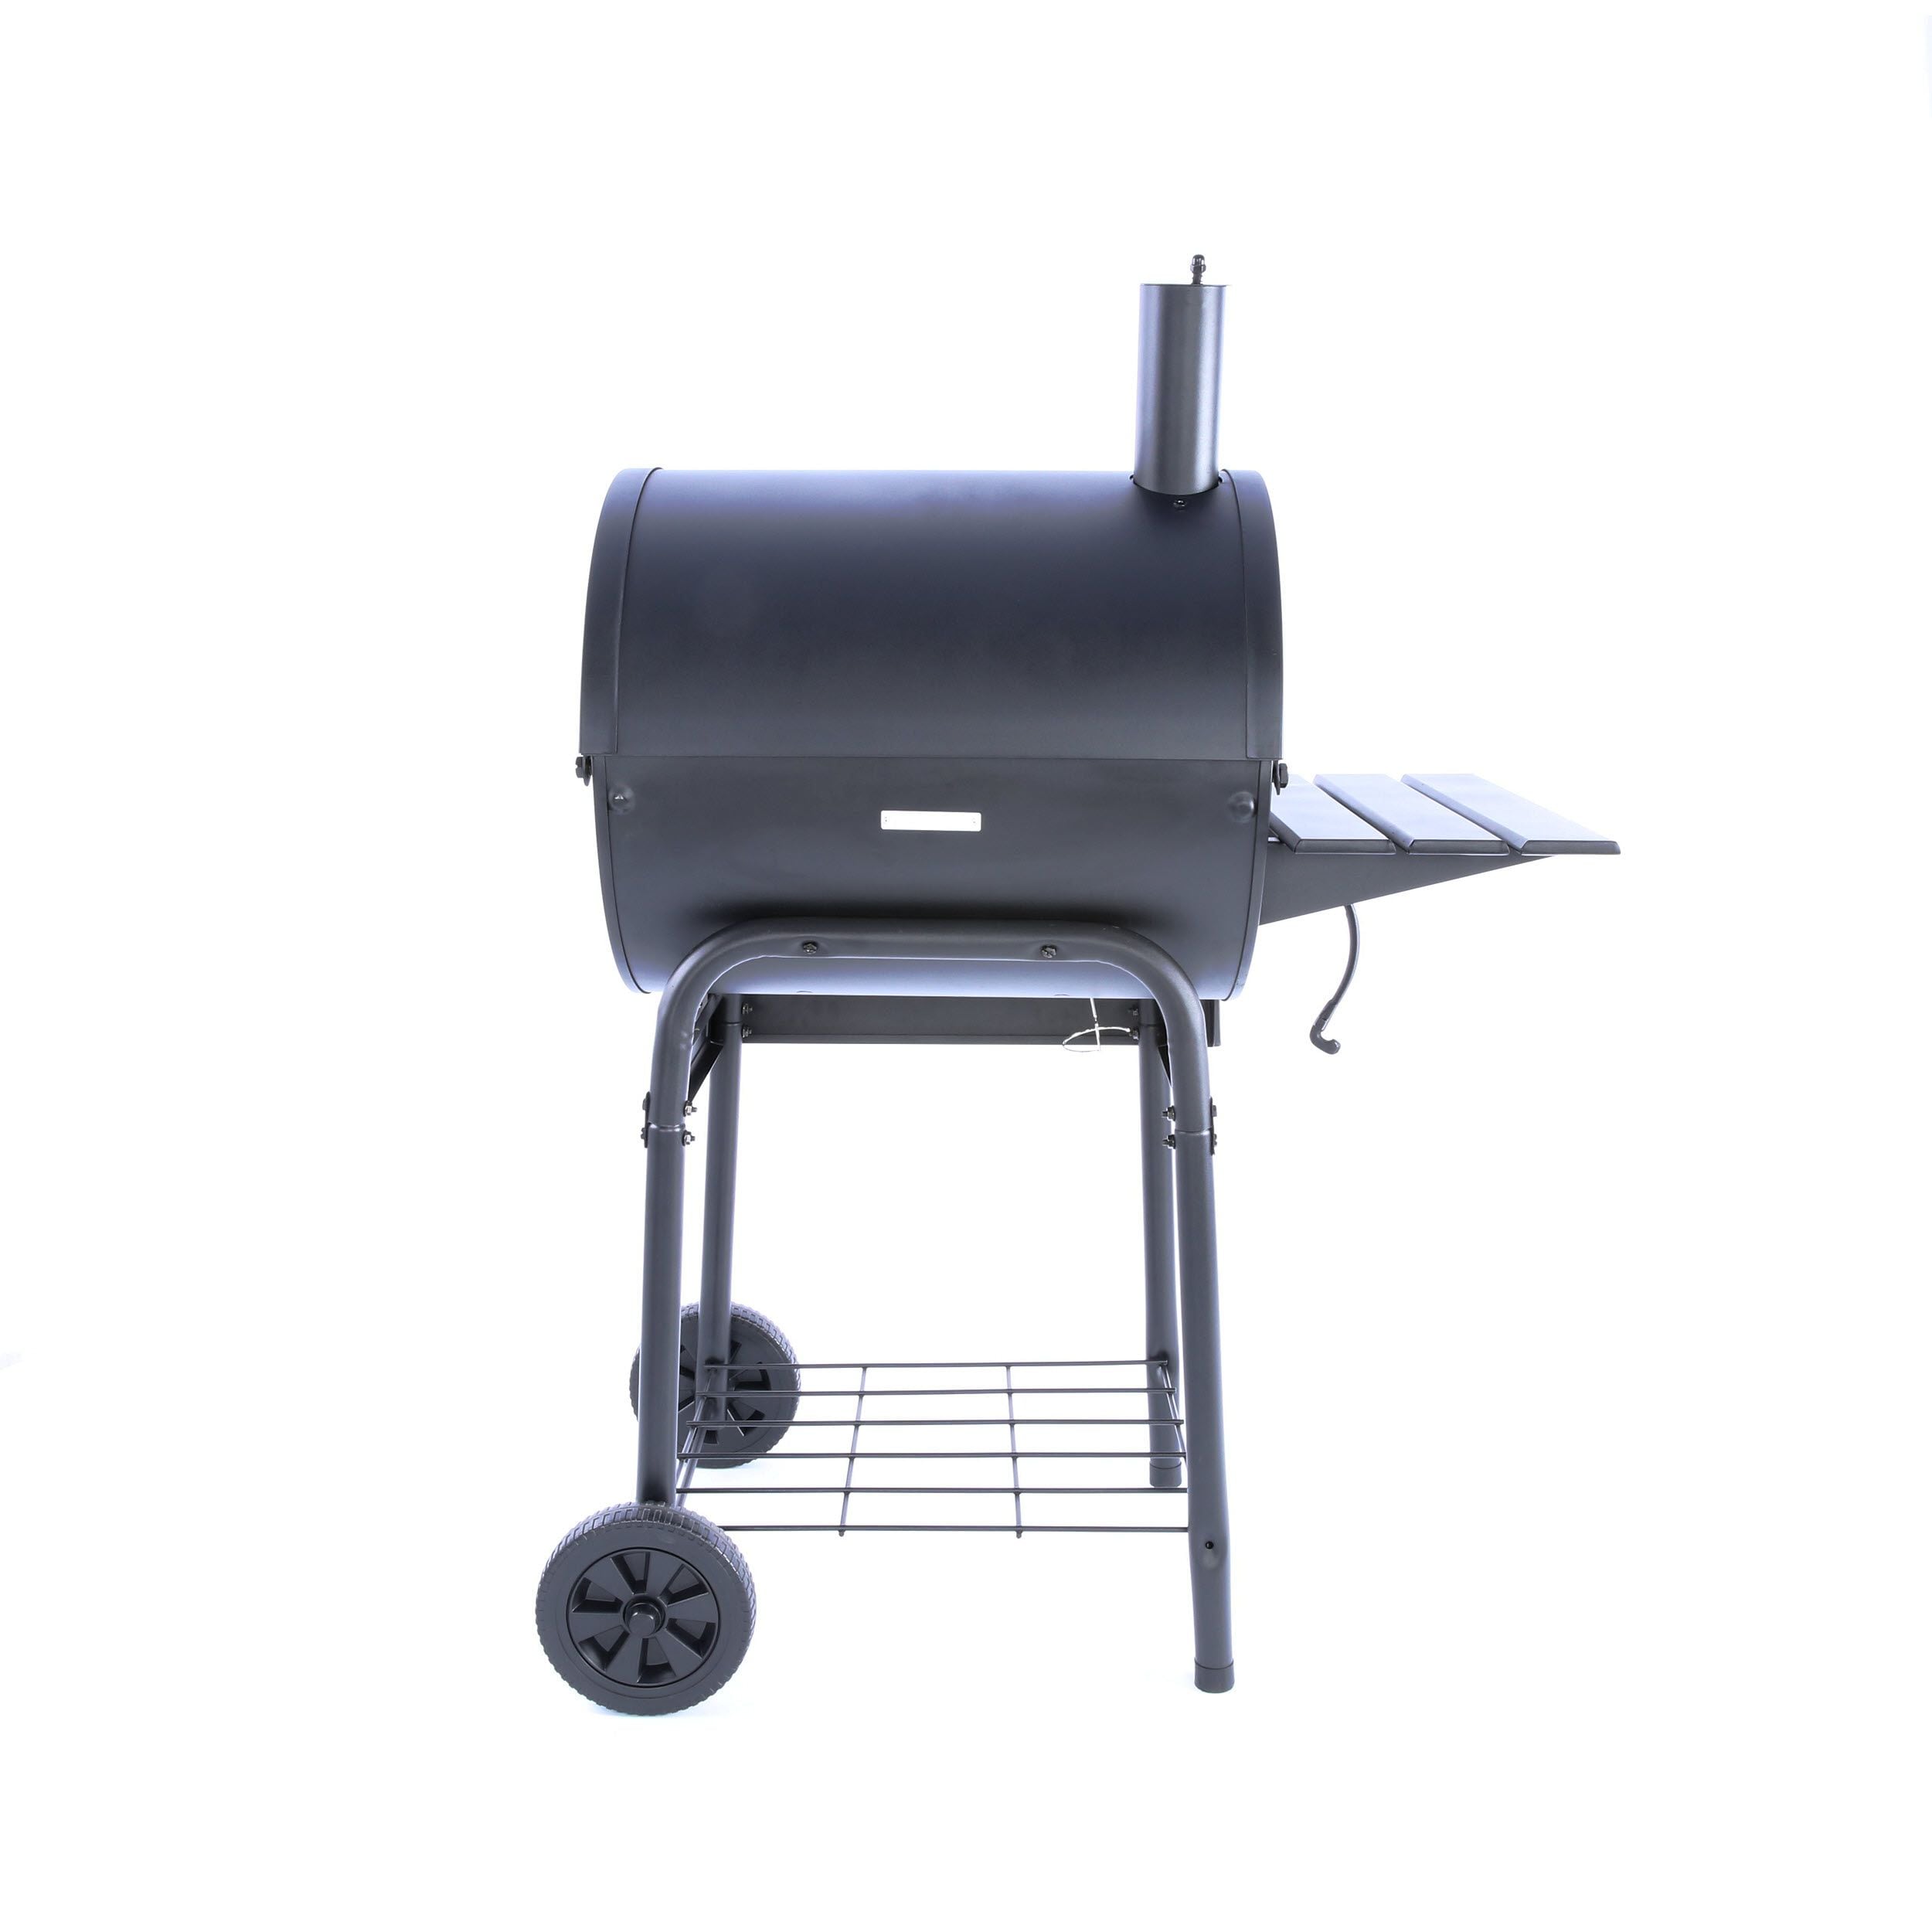 Shop Char-Griller Create a from a Charcoal Grill using Kingsford Wood Pellets, Charcoal and Kingsford Grill Accessories at Lowes.com